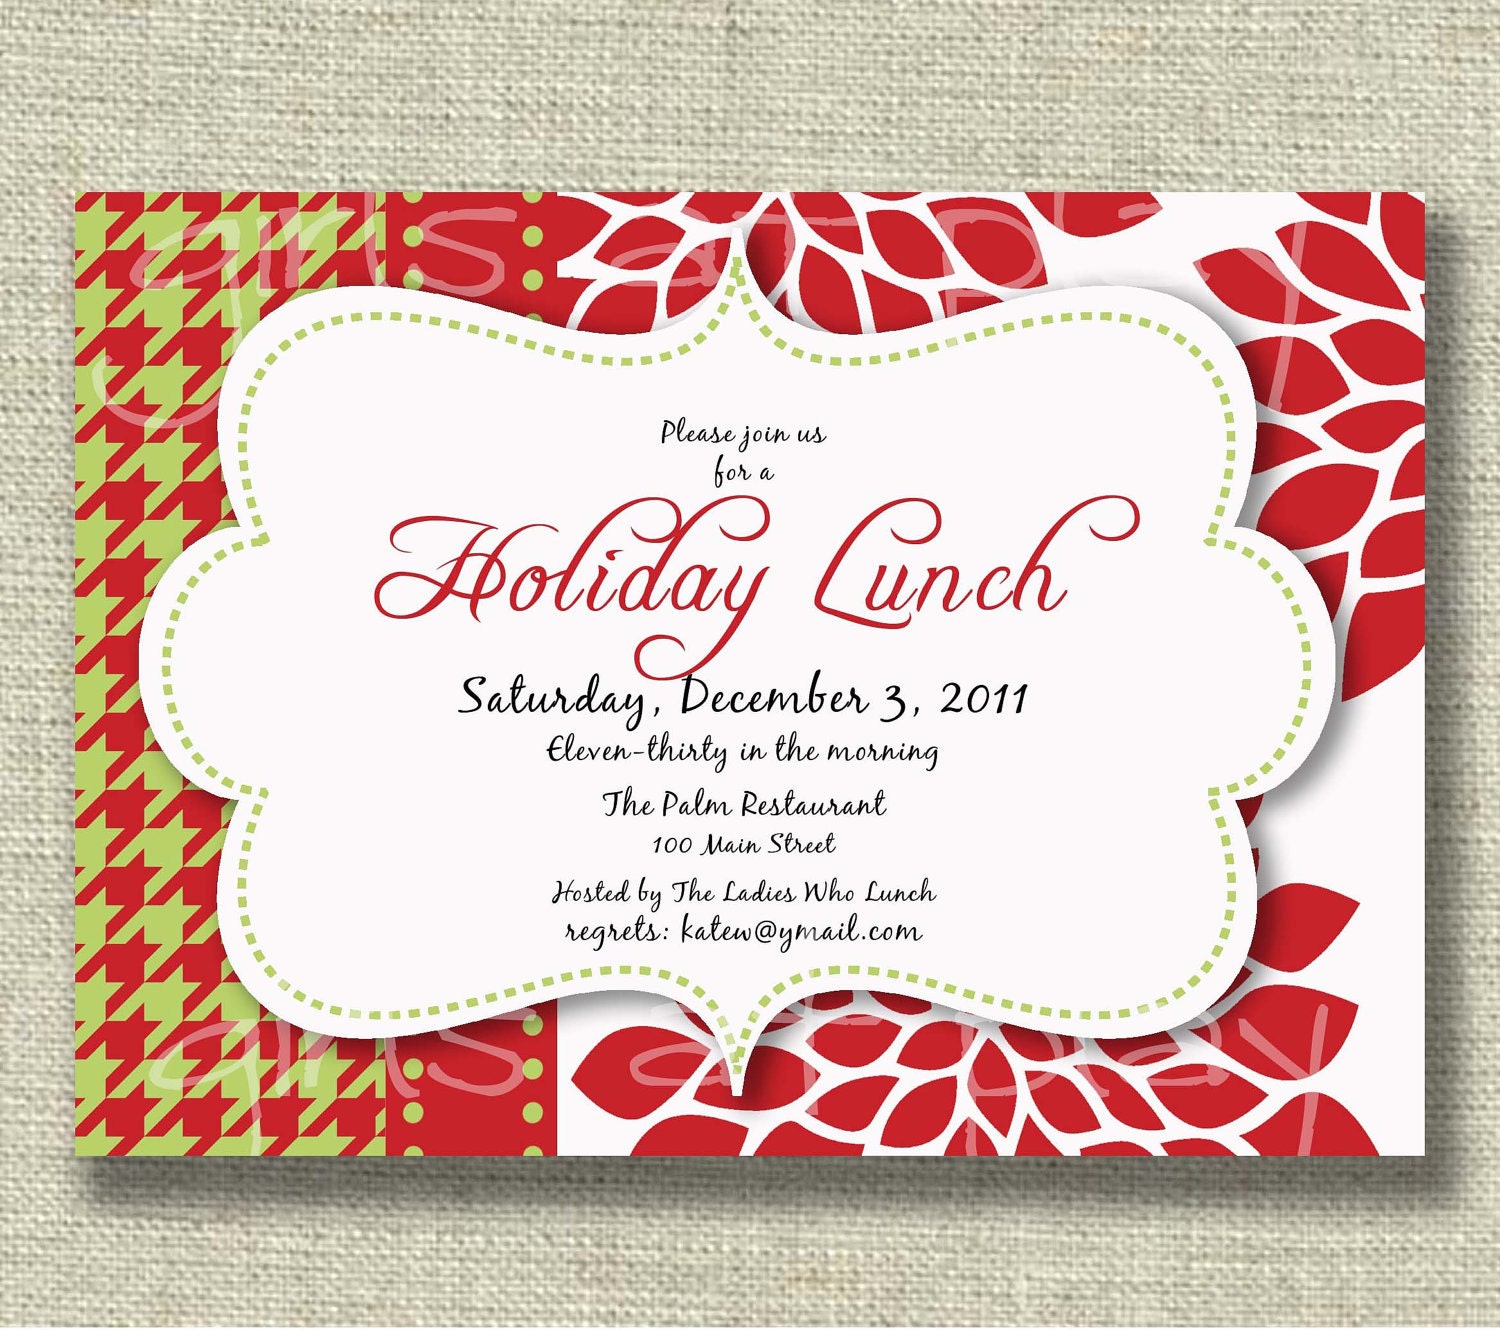 Holiday Lunch Invite Template